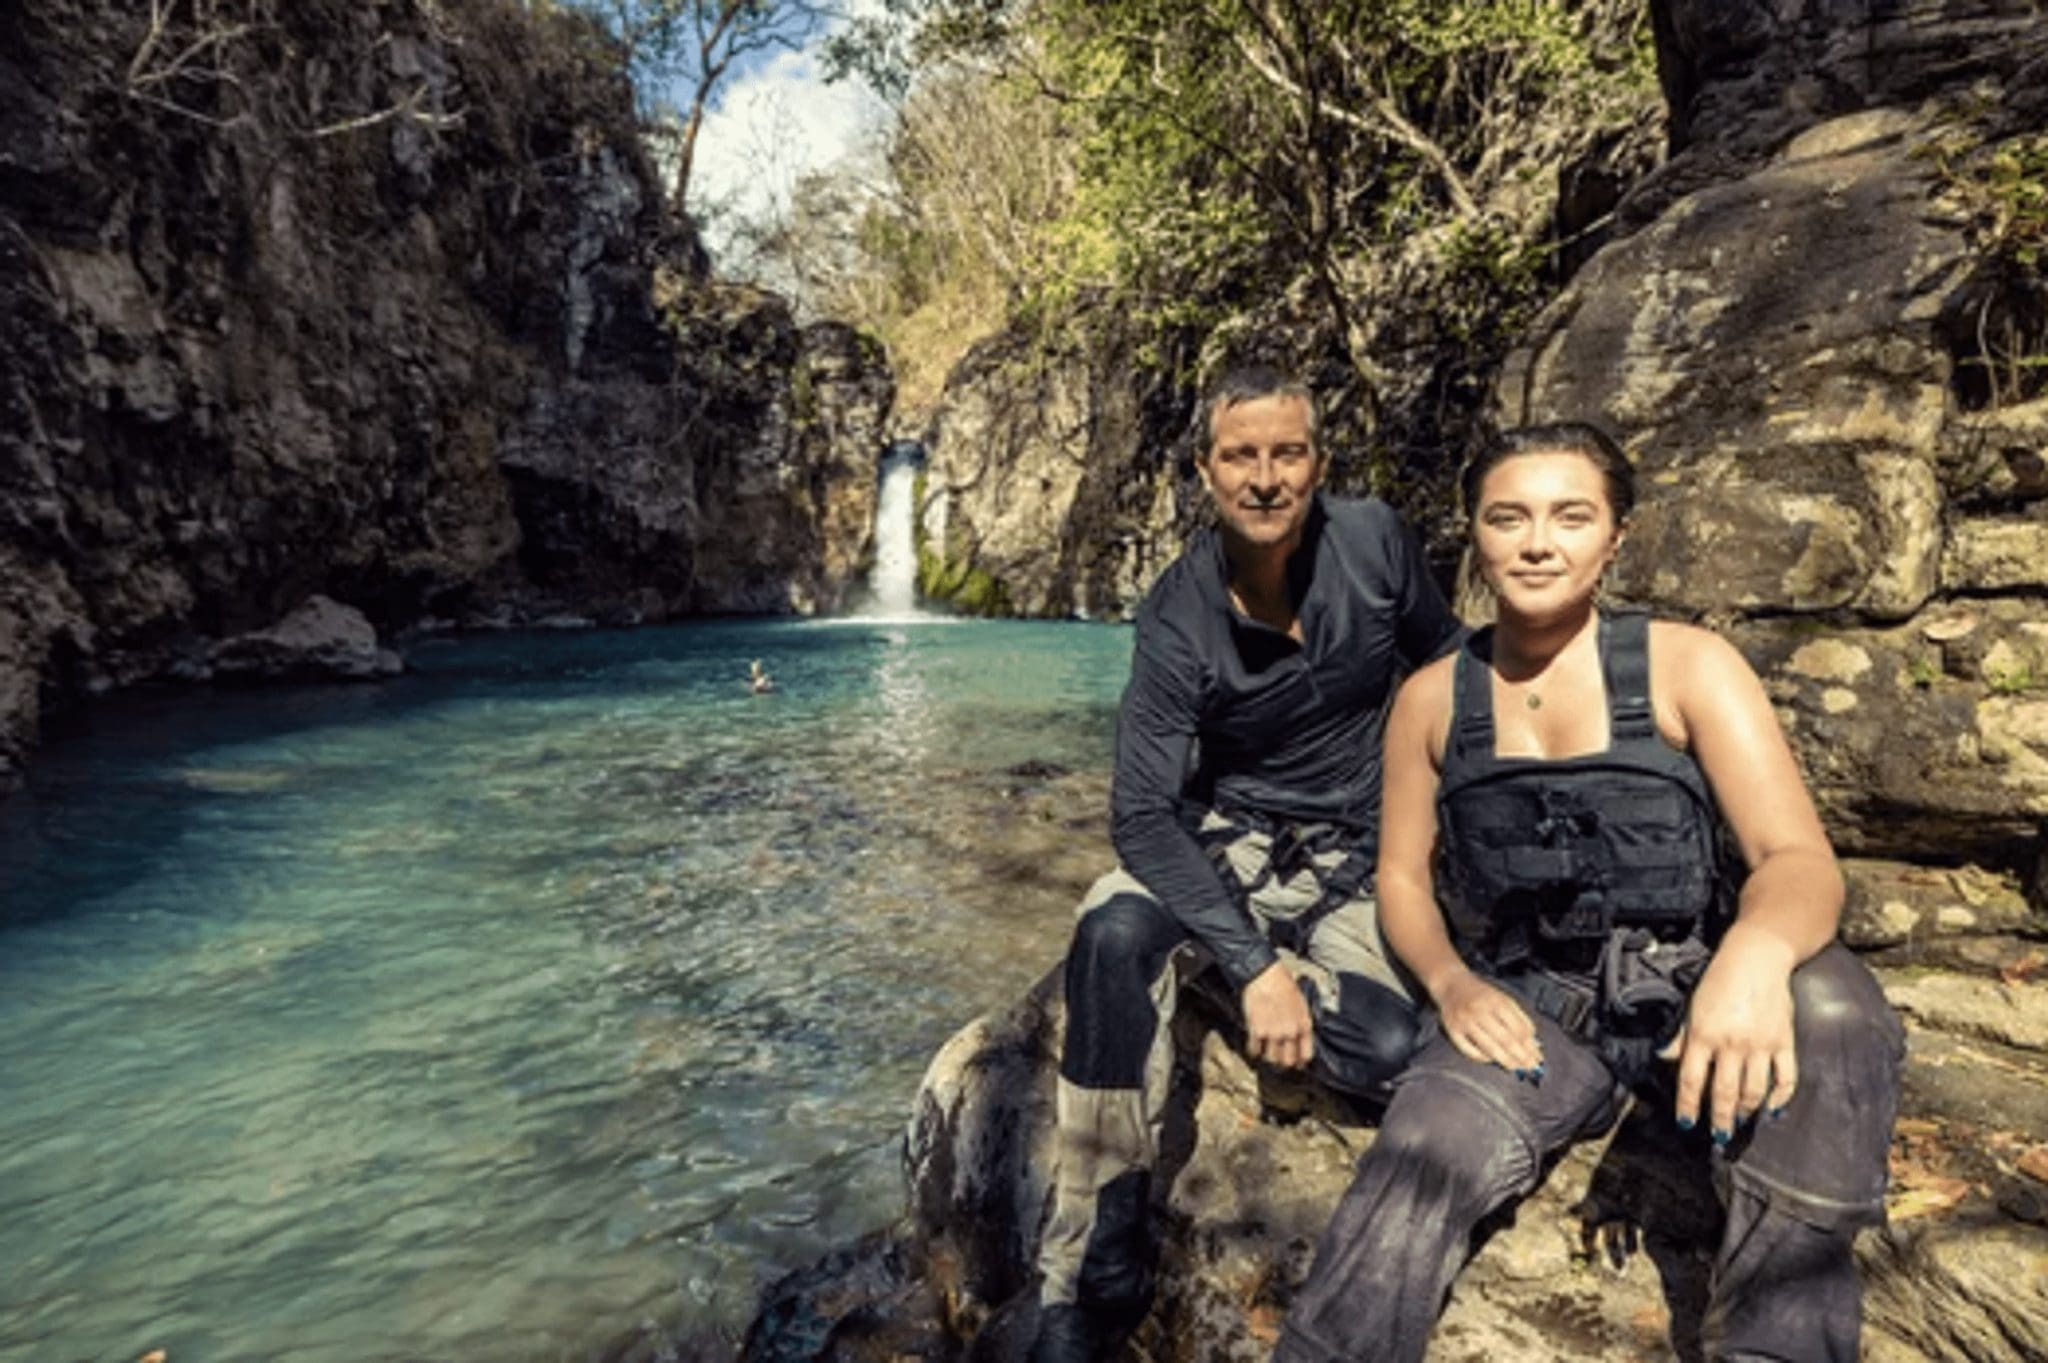 In A Clip From Bear Grylls' Running Wild, Florence Pugh Discusses Her Intrepid Grandma